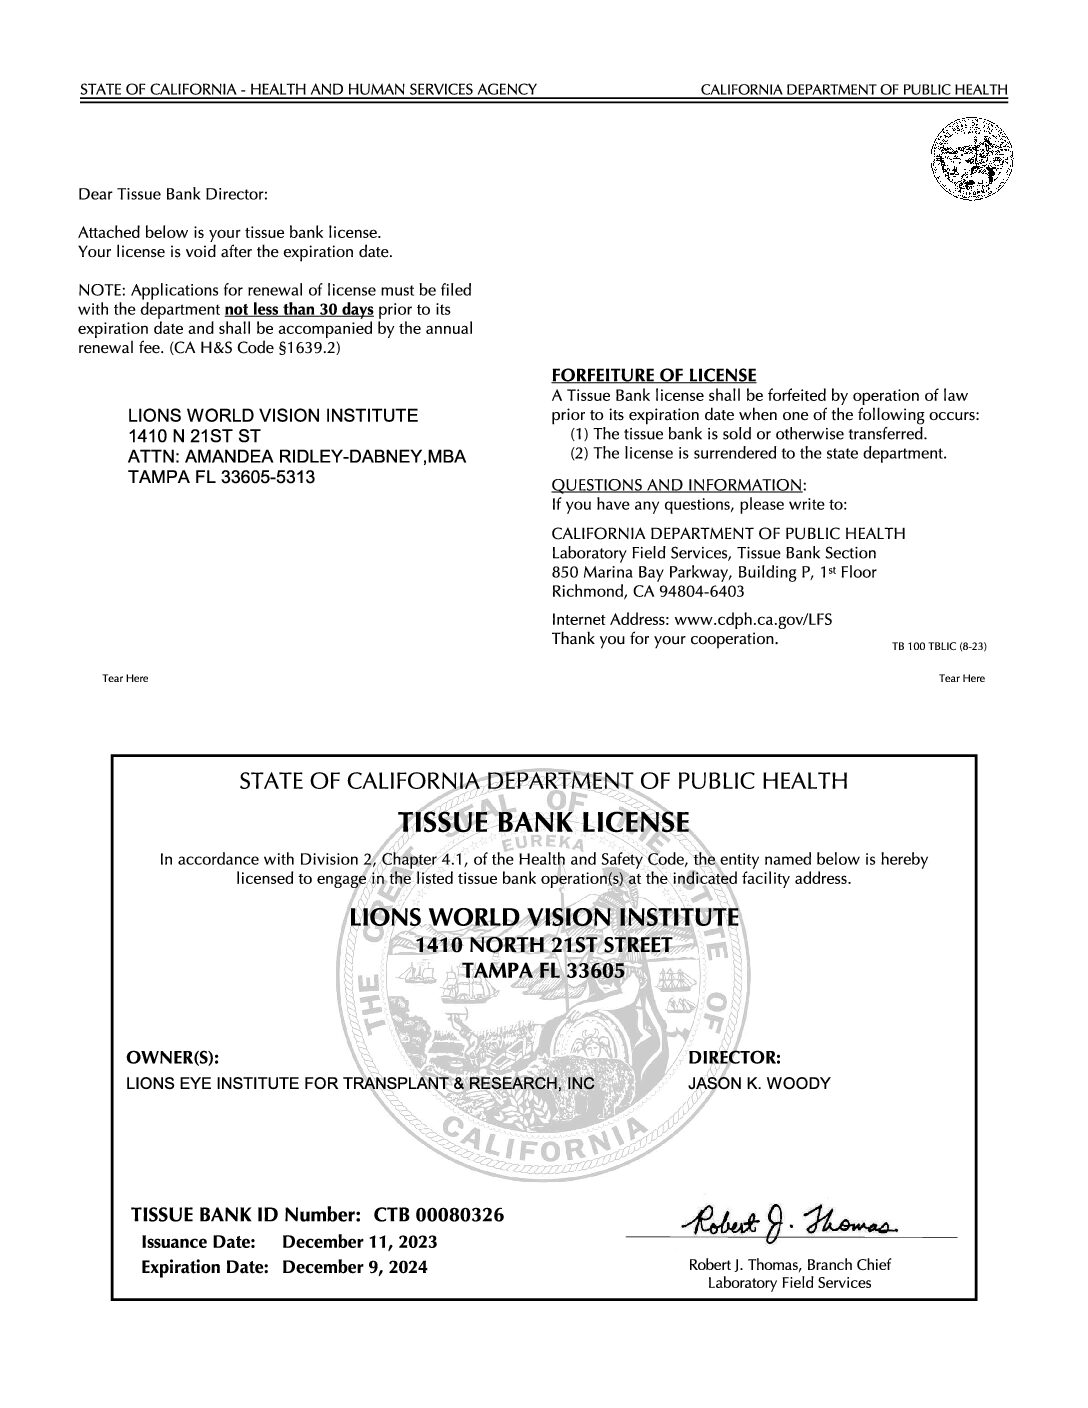 Click to open the State of California Tissue Bank License file